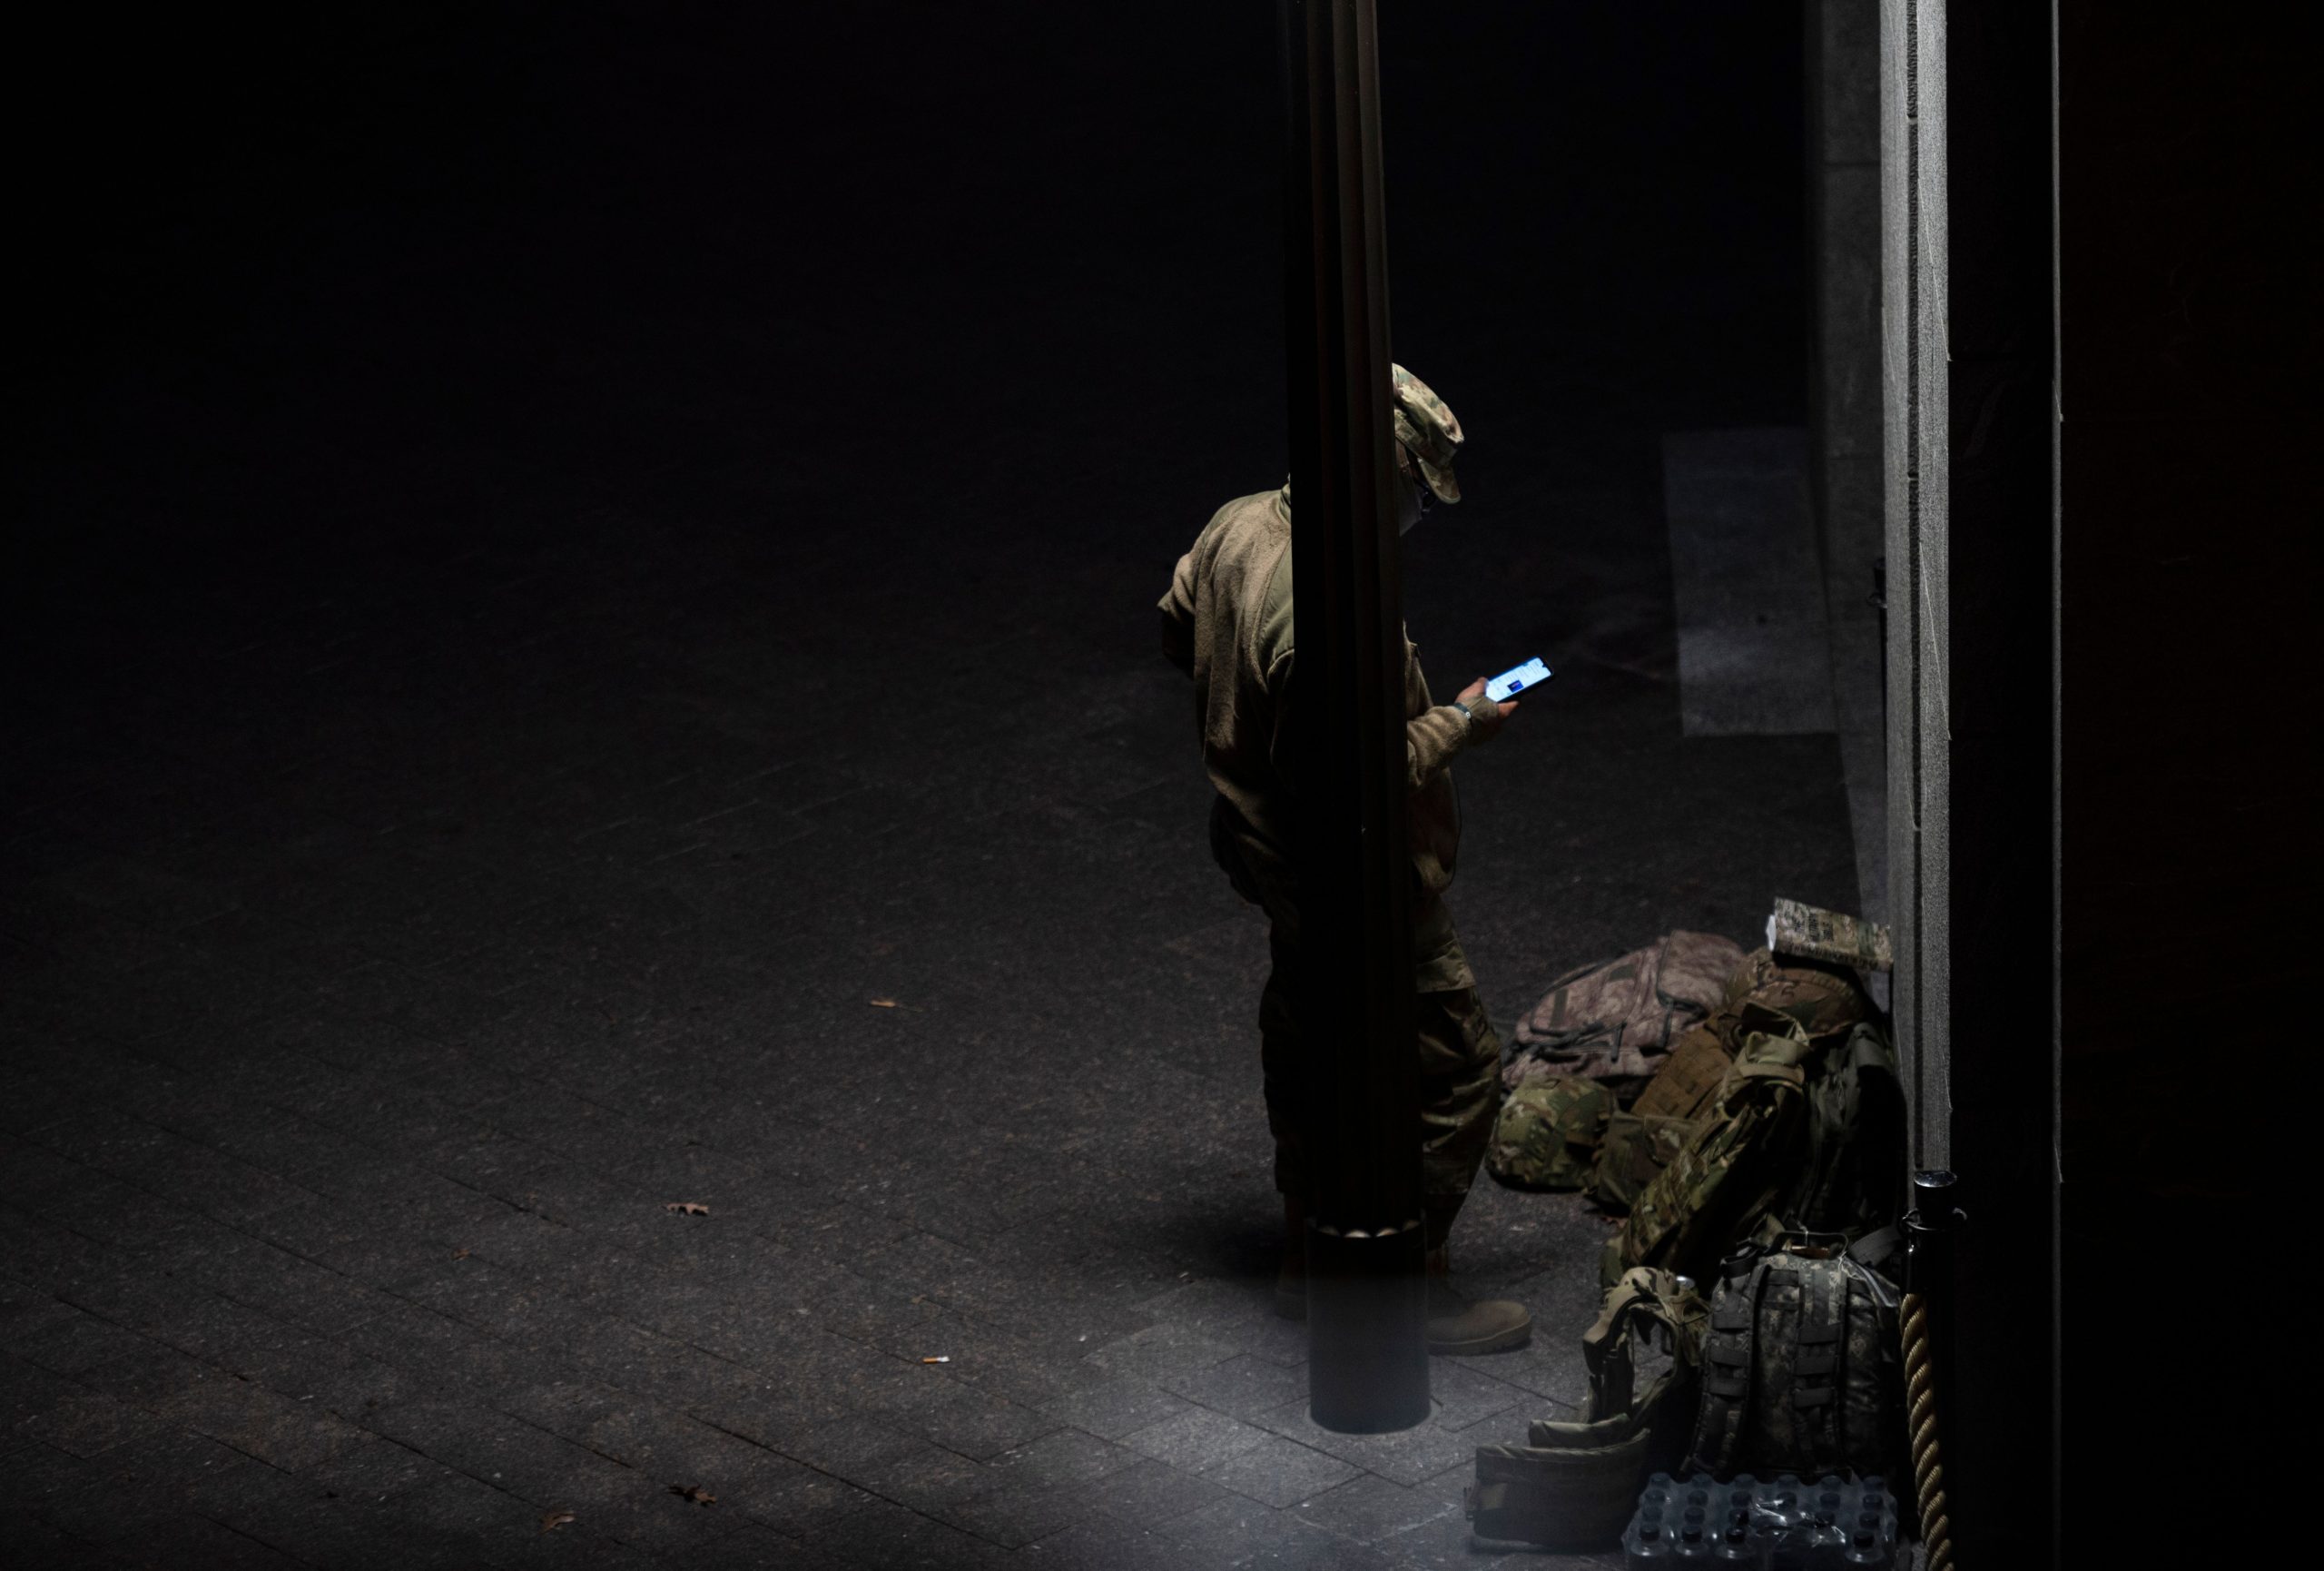 A member of the US National Guard looks at his phone as he takes a break at the US Capitol in Washington, DC on January 17, 2021, during a nationwide protest called by anti-government and far-right groups supporting US President Donald Trump and his claim of electoral fraud in the presidential election.